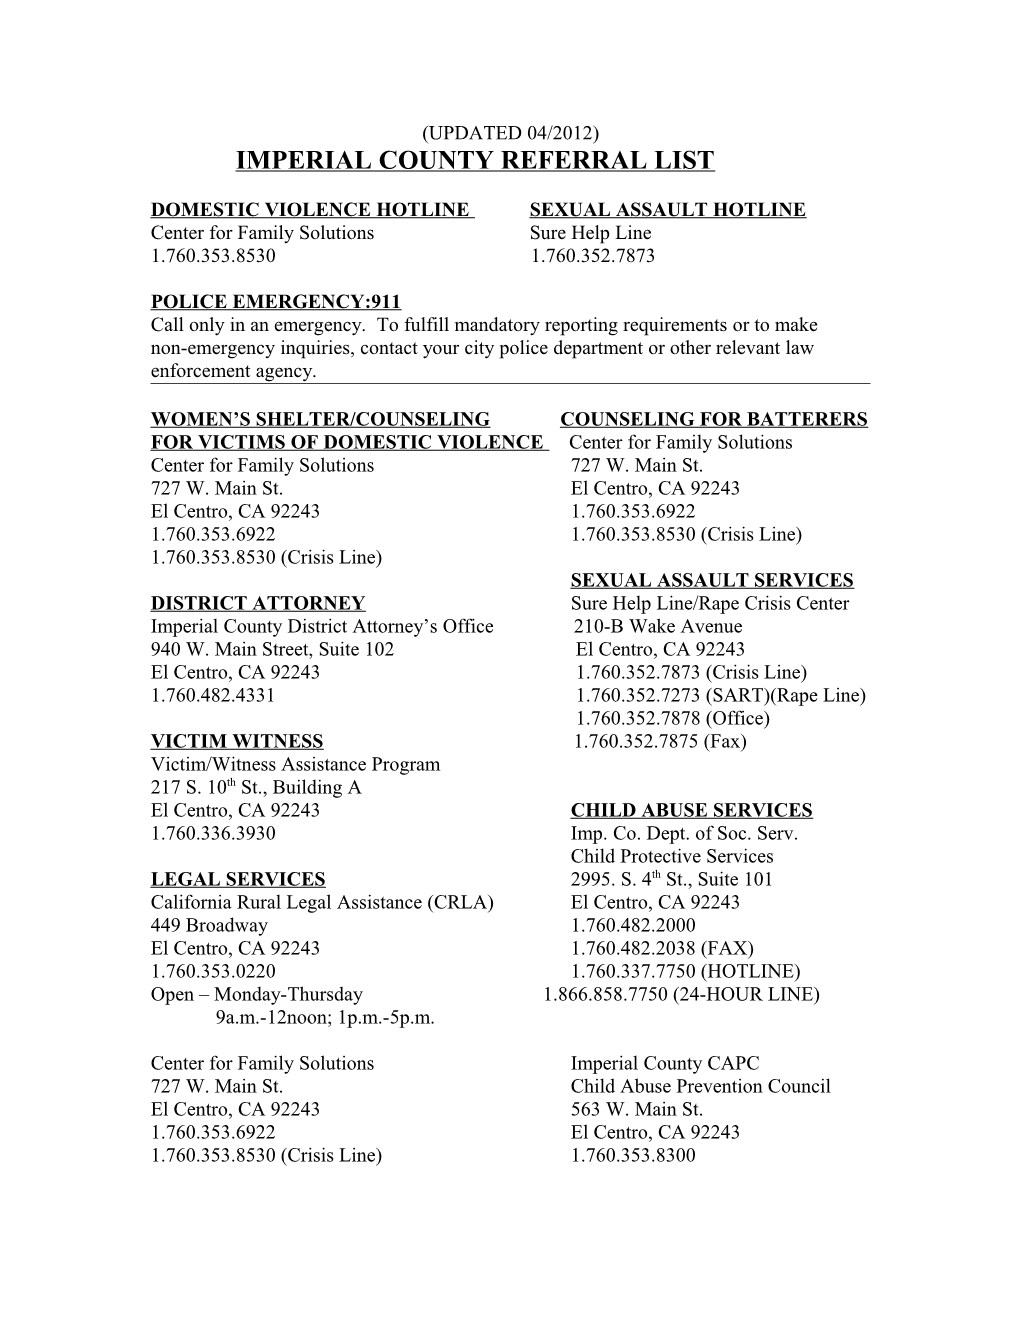 Imperial County Referral List